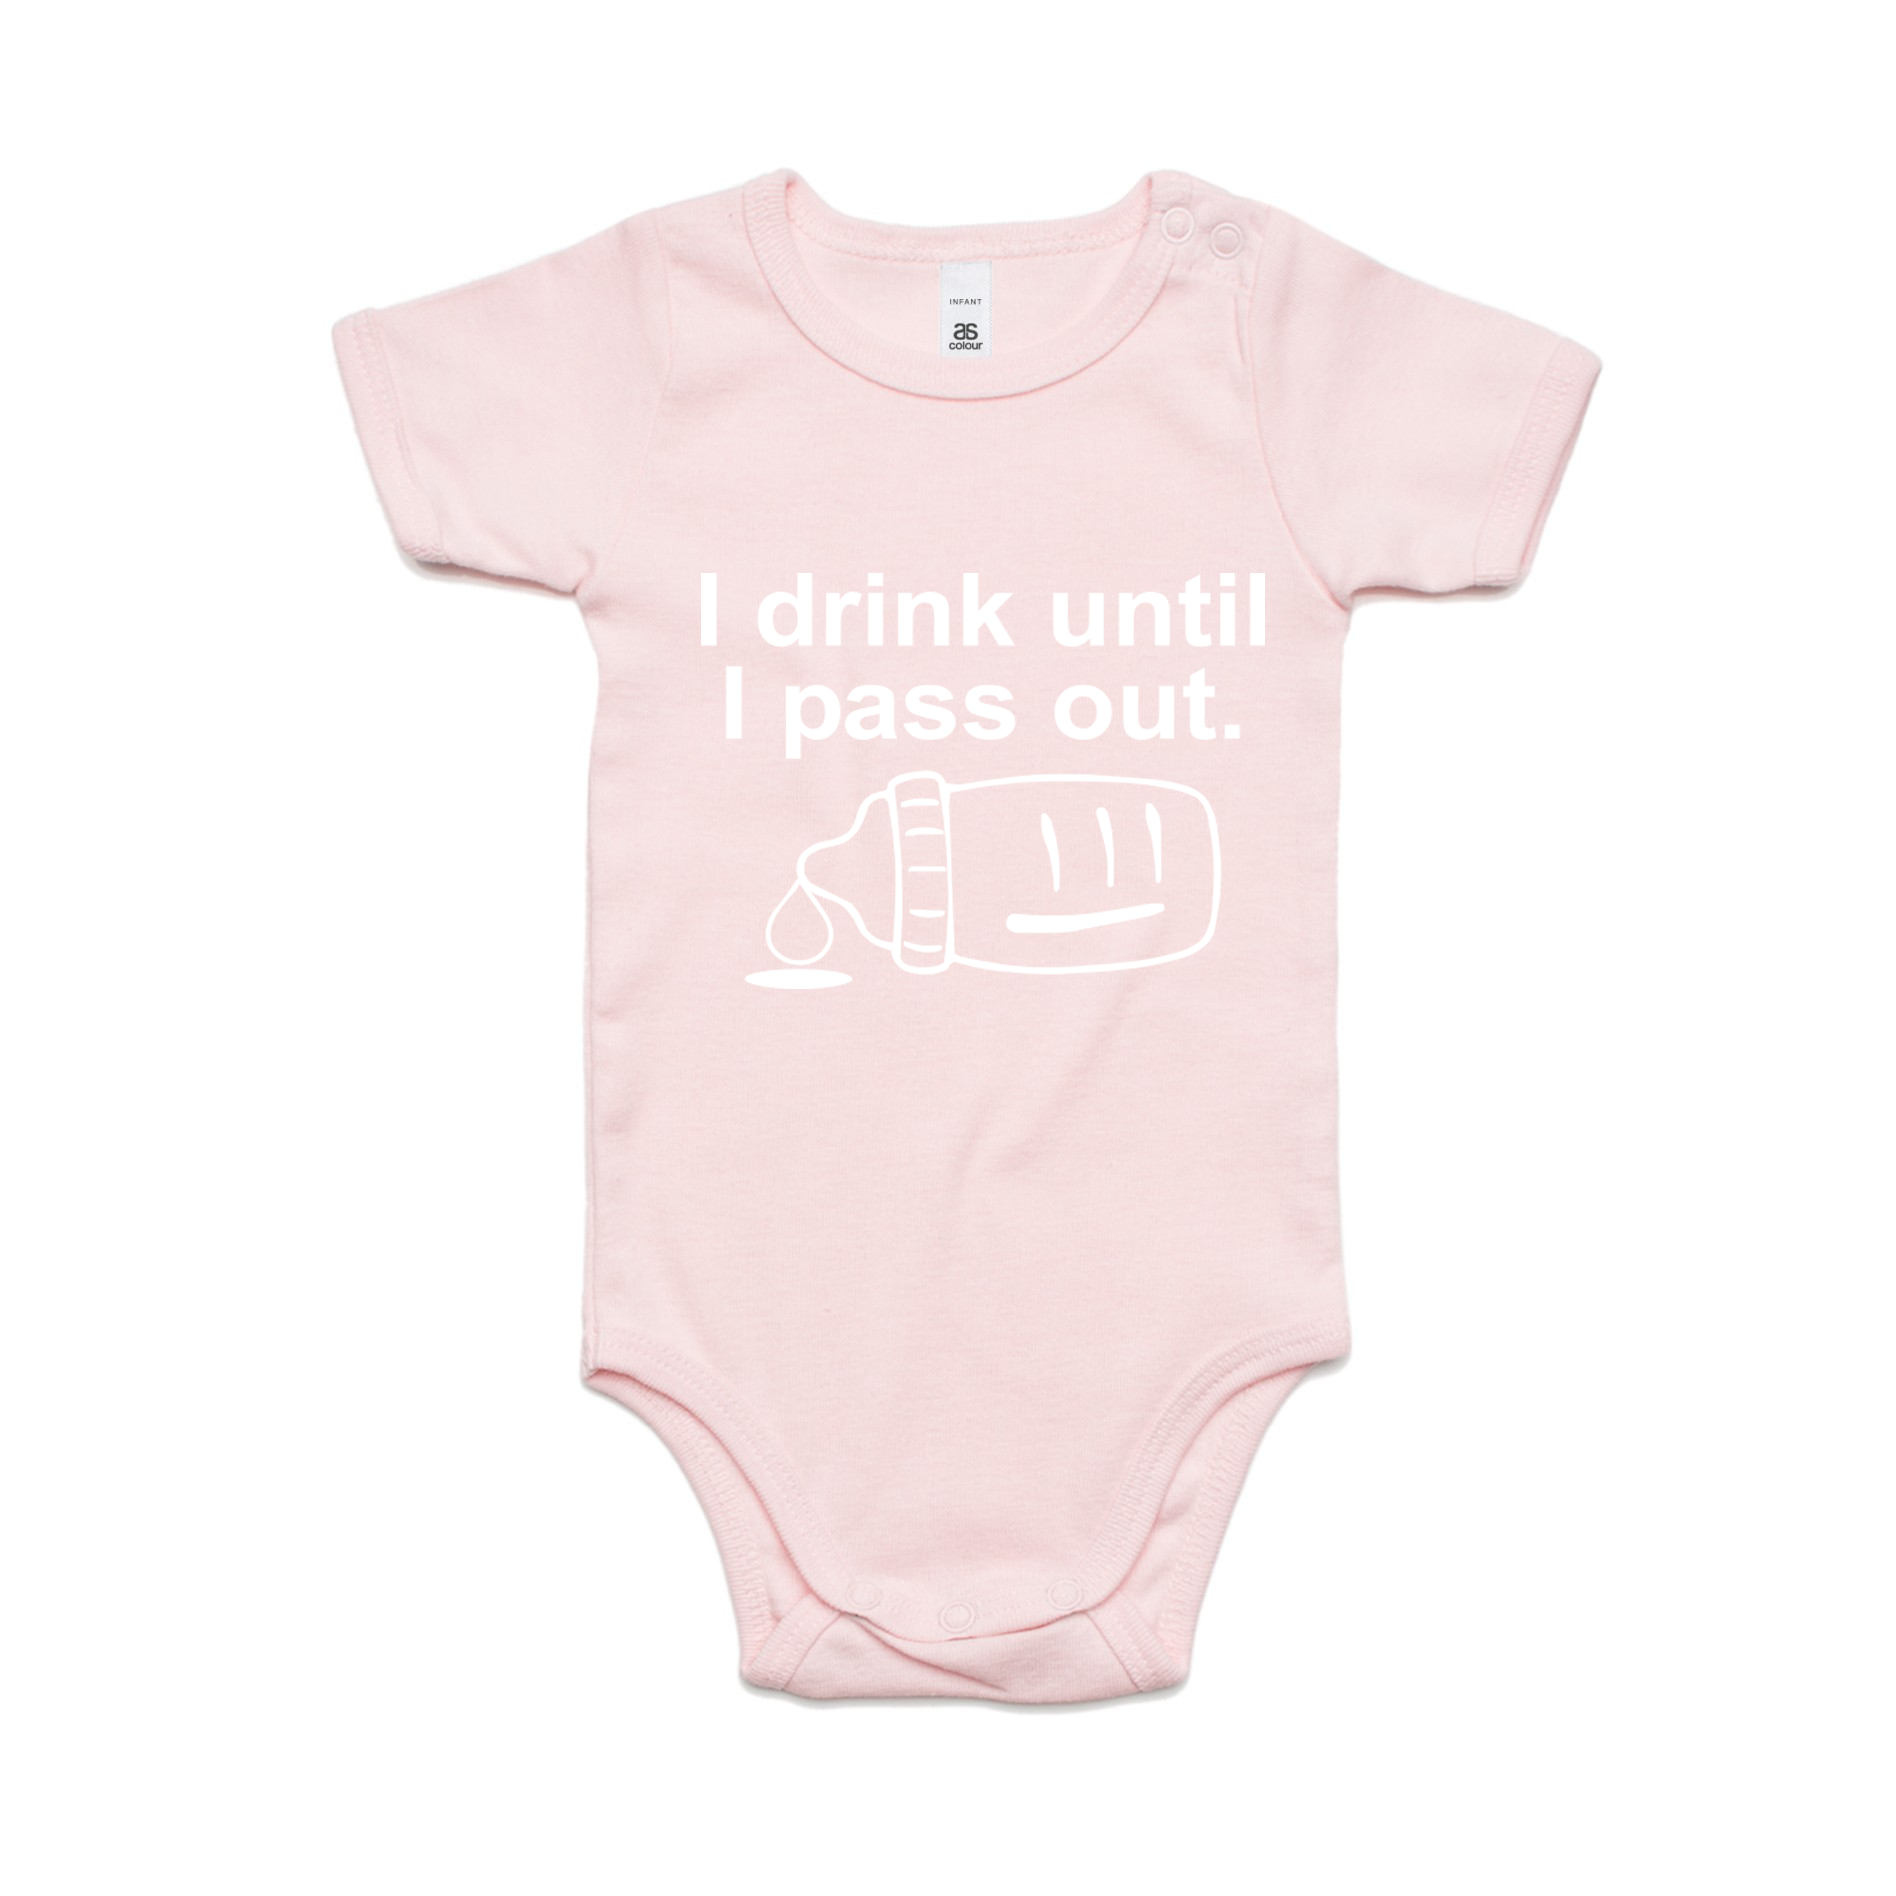 I DRINK UNTIL I PASS OUT (WHITE PRINT)